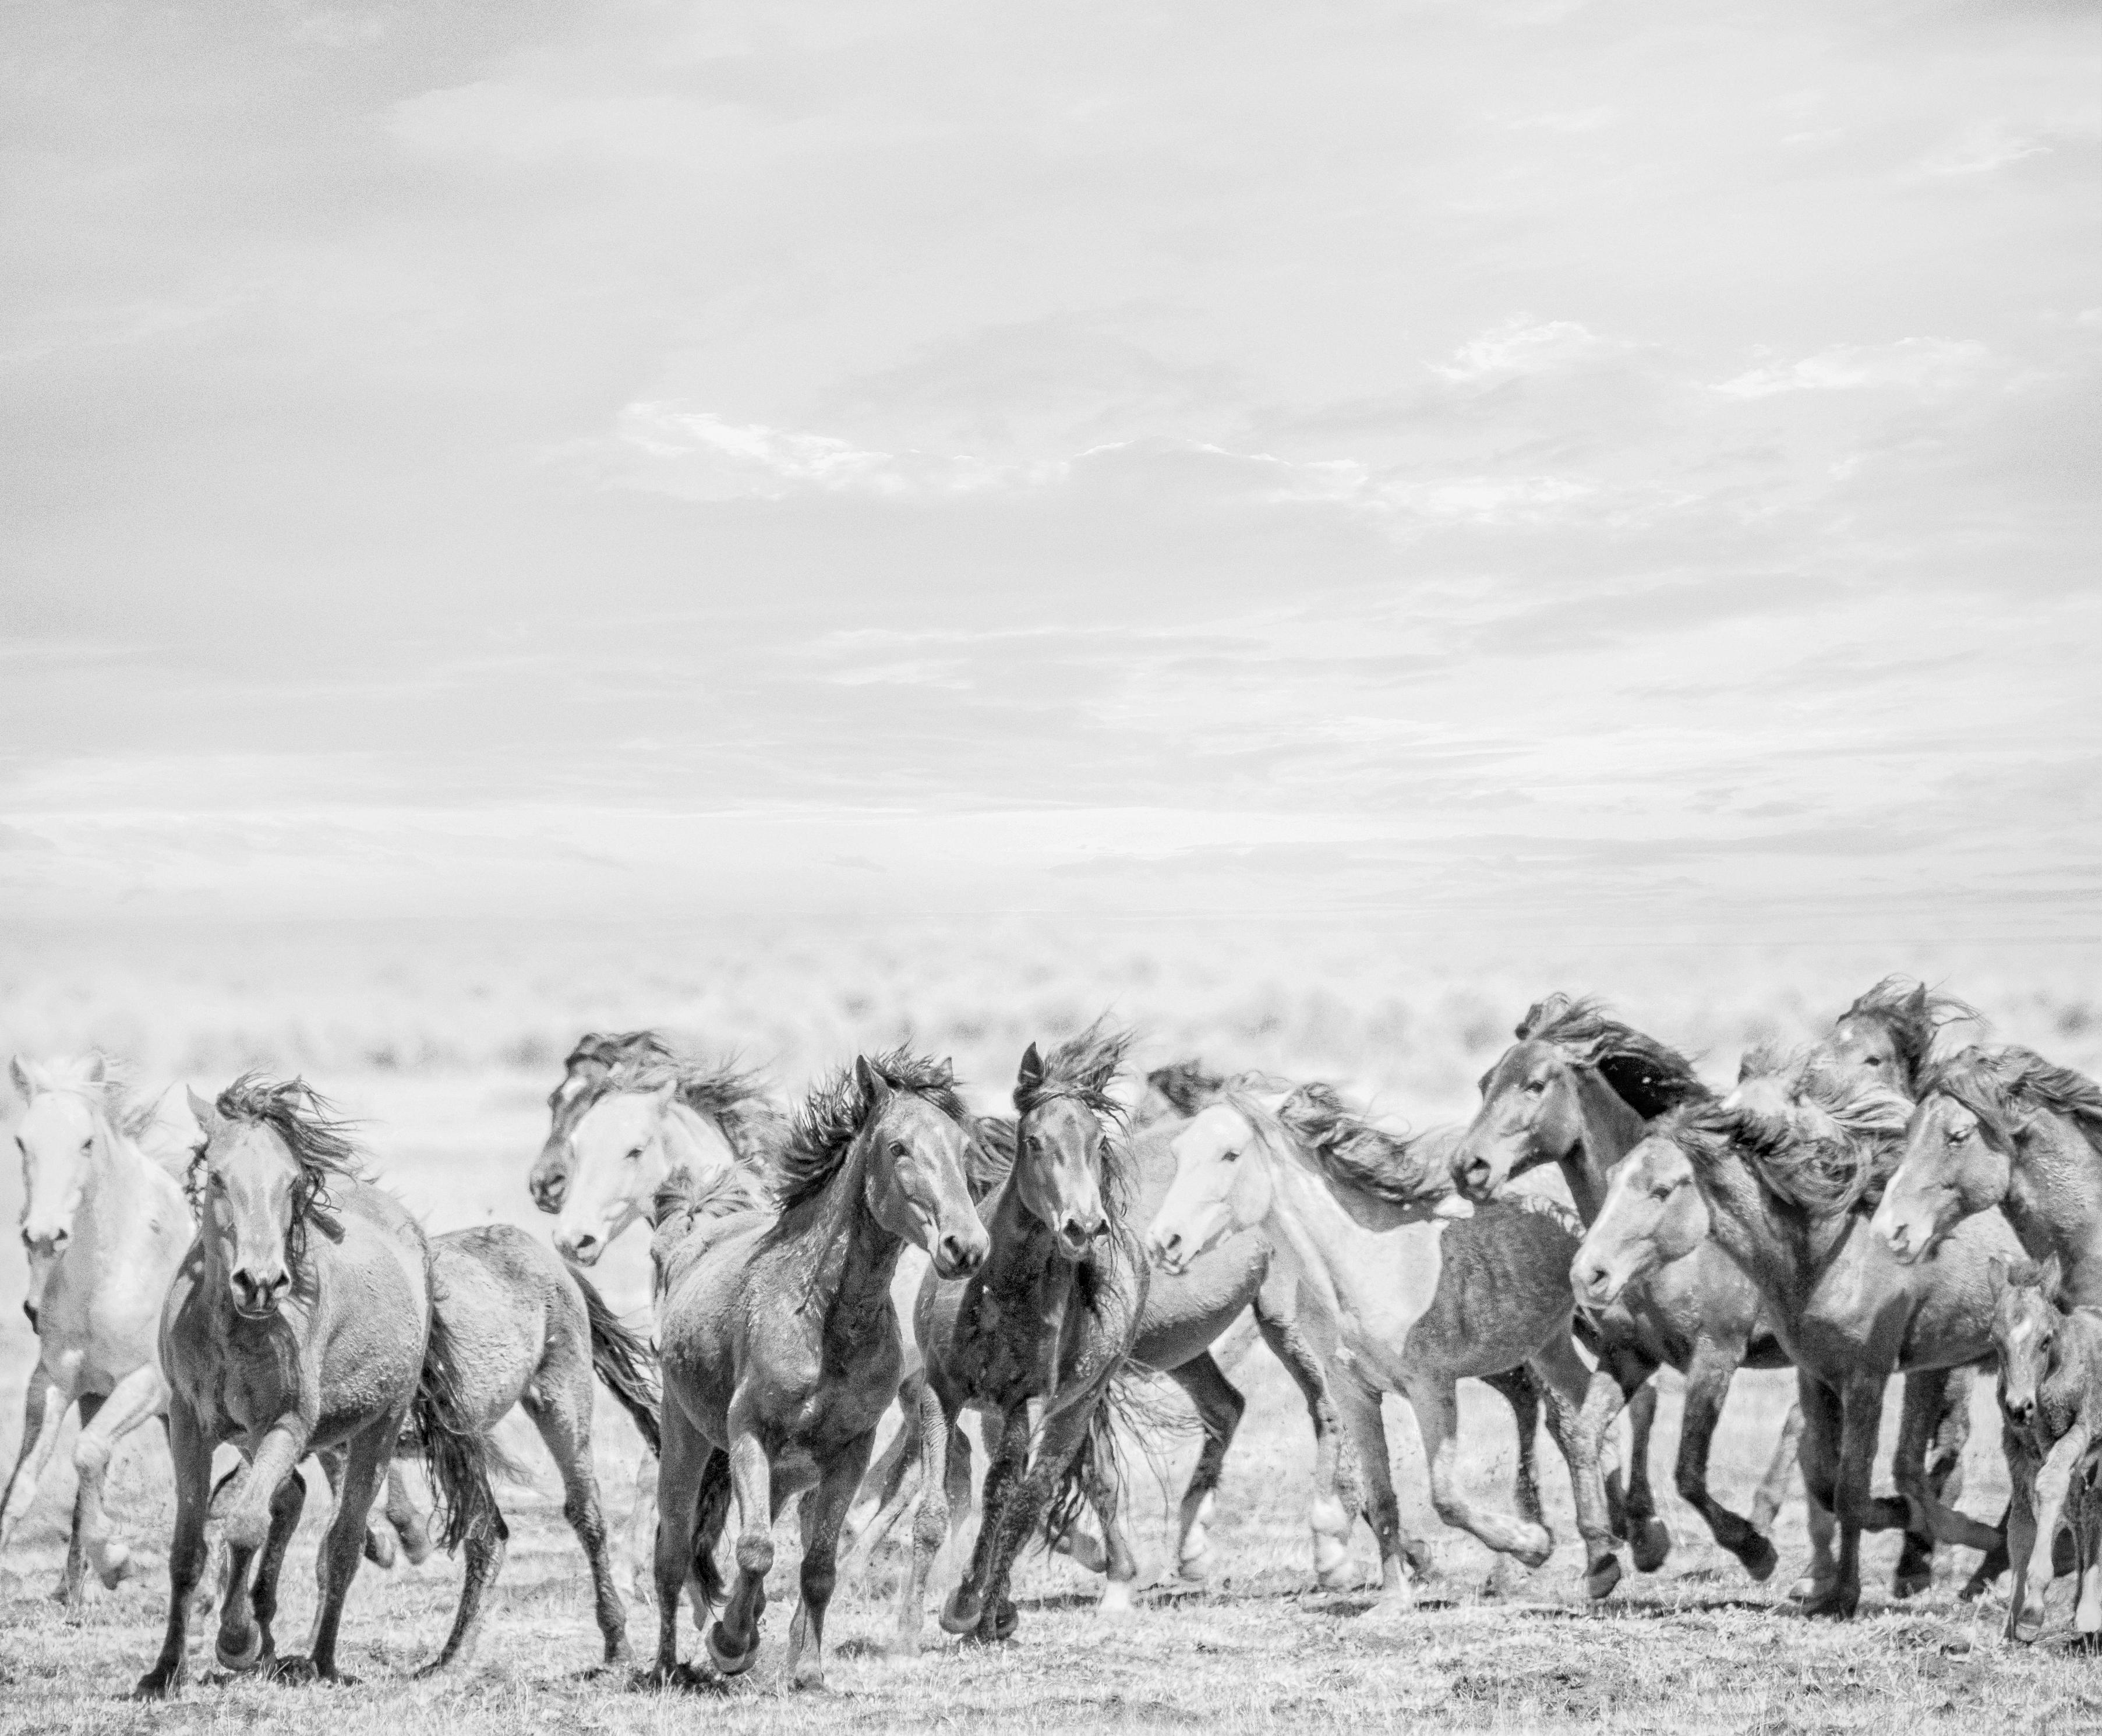 Shane Russeck Animal Print - "Go West" 80x110 - Contemporary Photography of Wild Horses - Mustangs